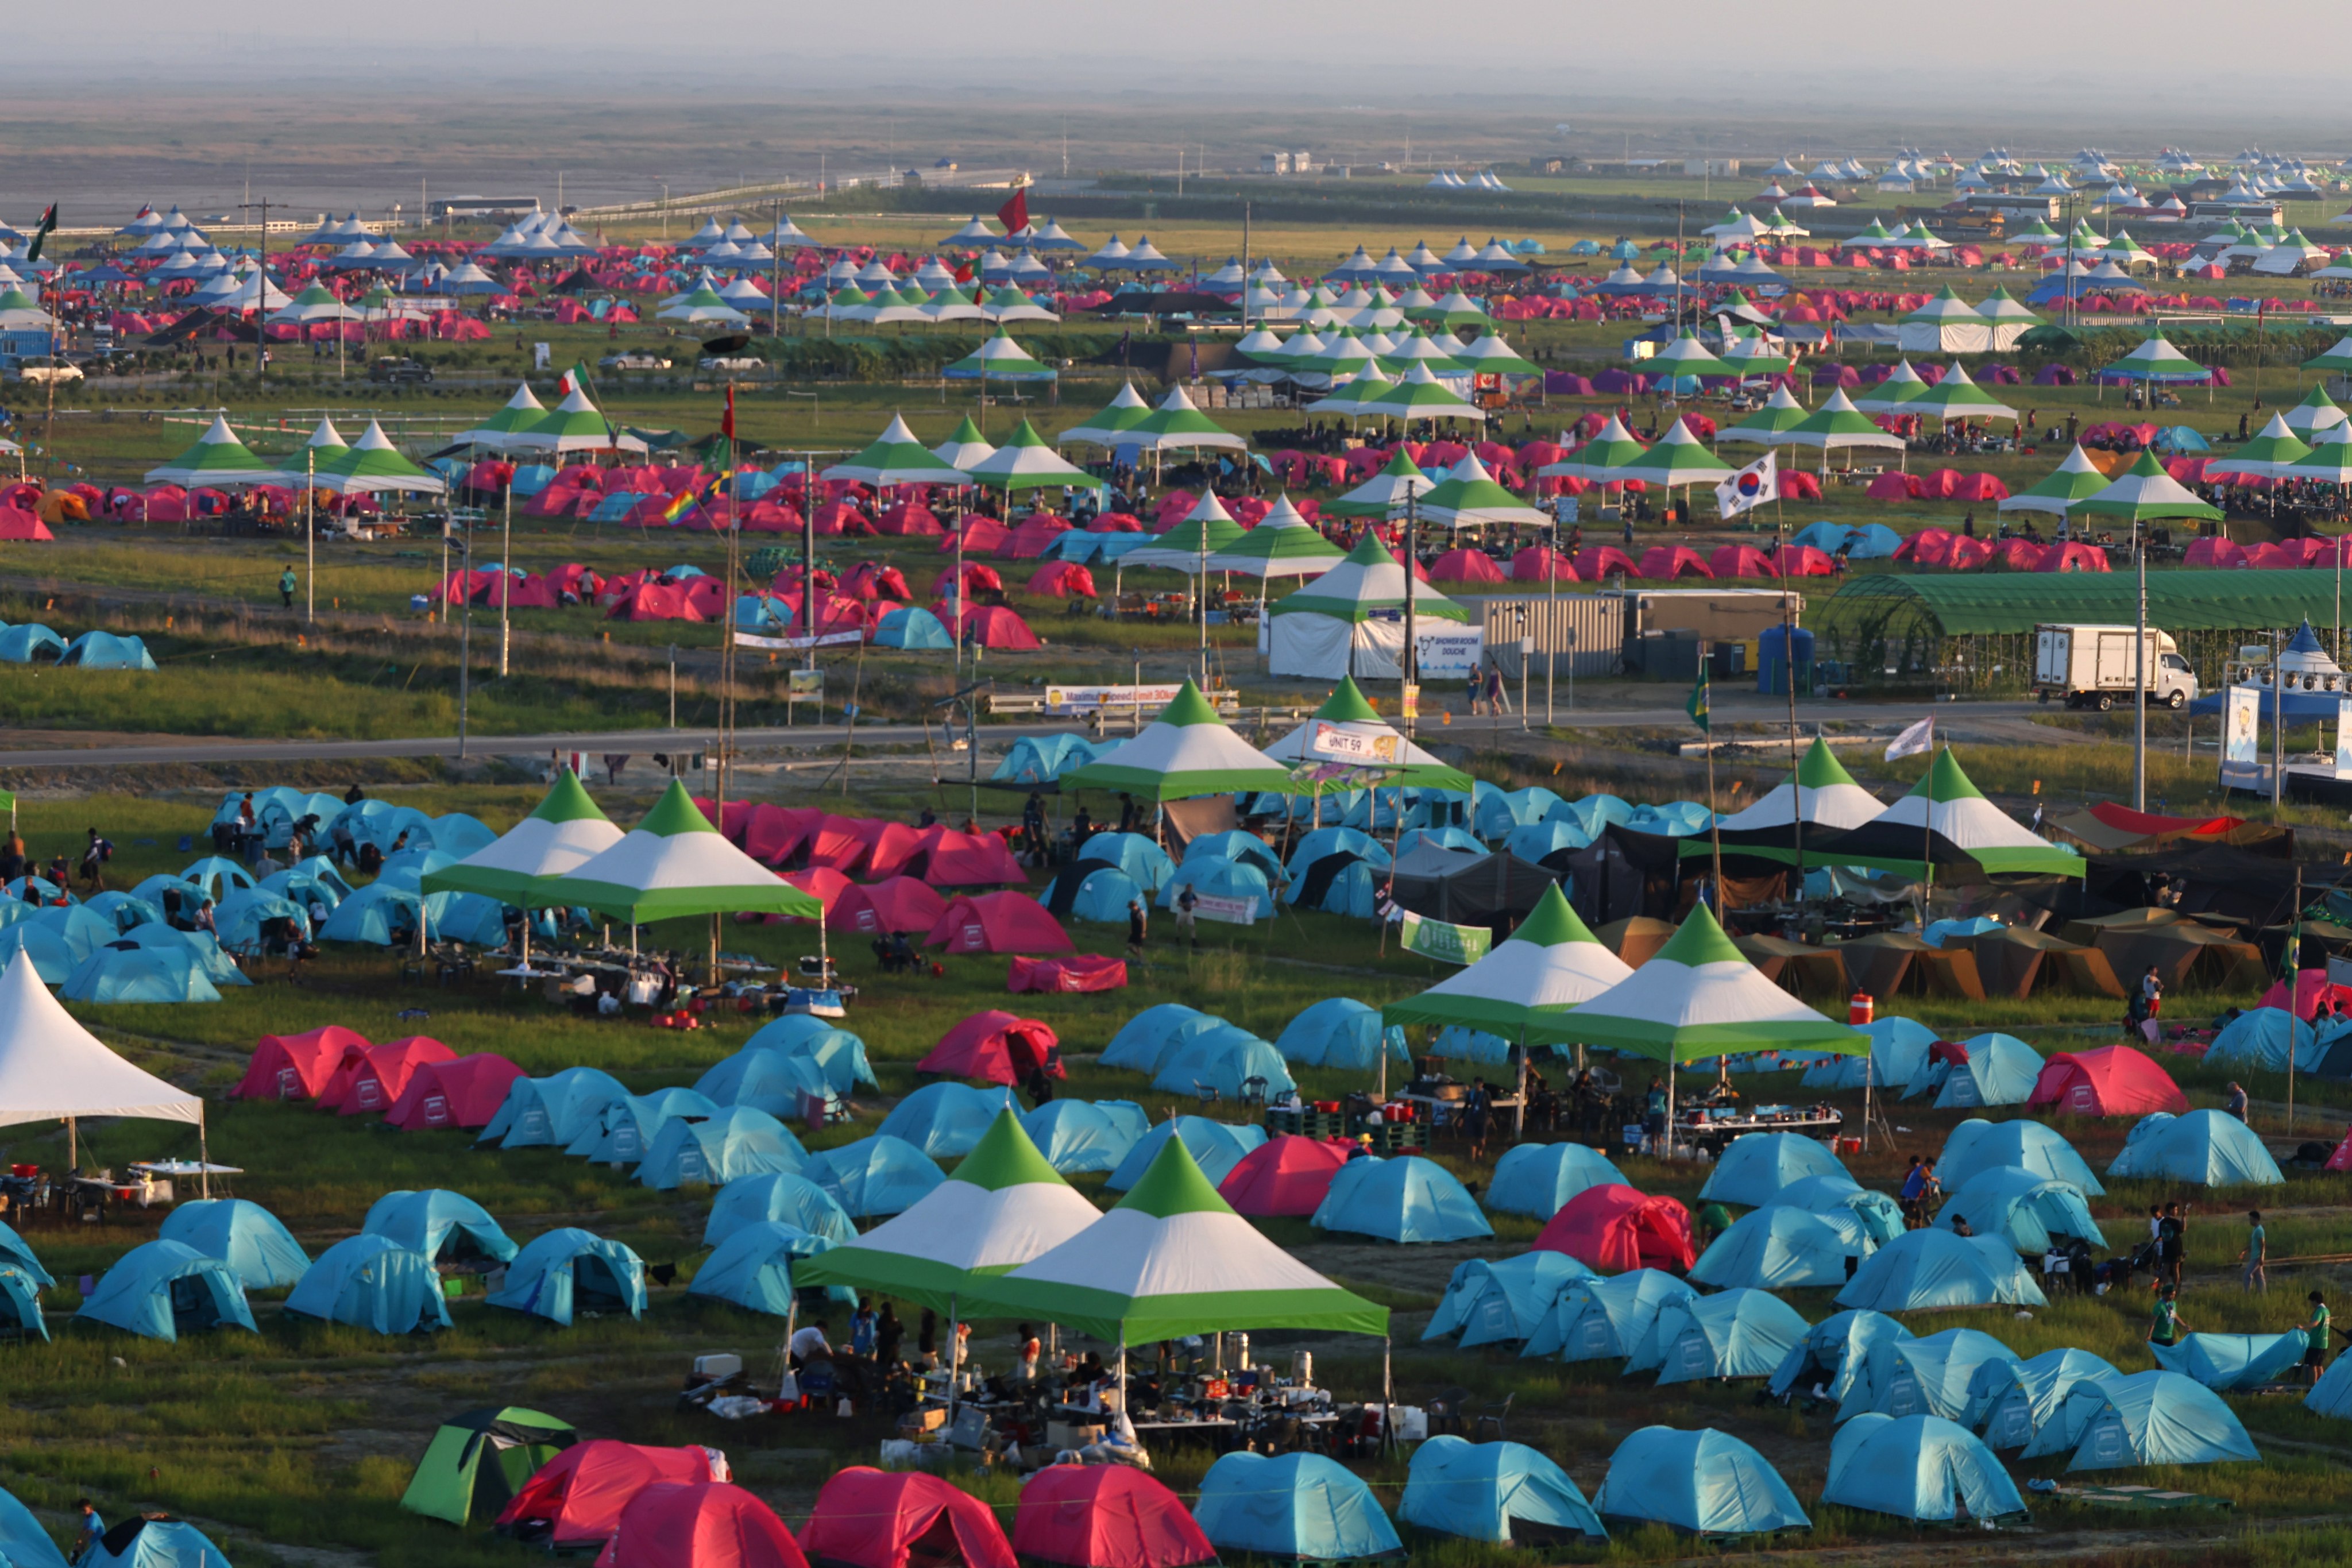 Nearly 40,000 participants have safely departed the campsite and relocated to multiple sites in Seoul, according to organisers. Photo: EPA-EFE